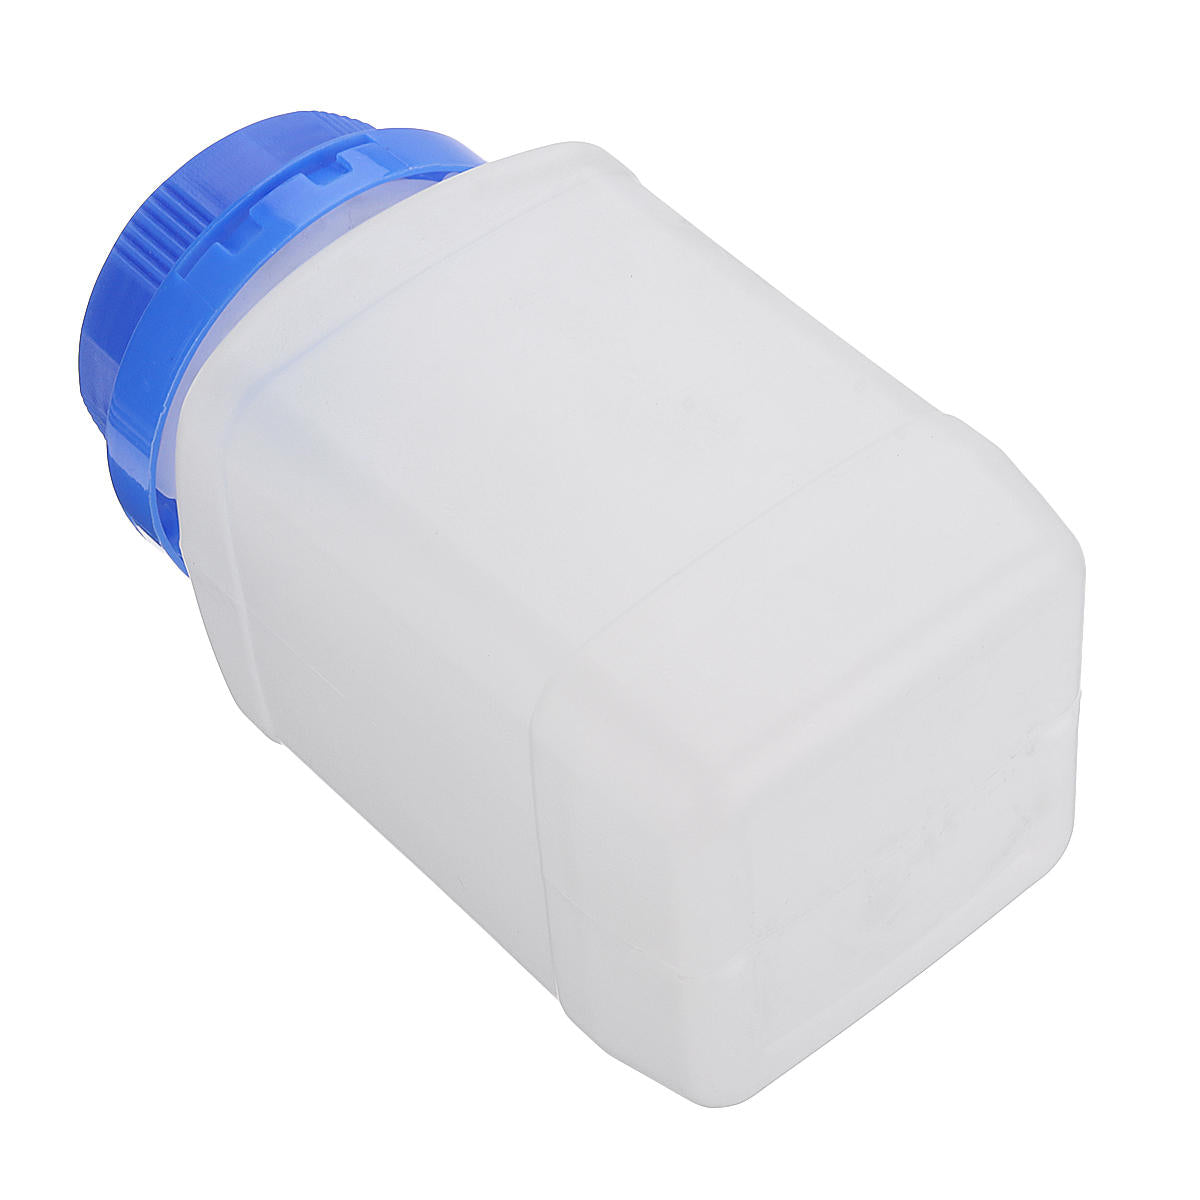 100/250/500ml Plastic Square Sample Sealing Bottle Wide Mouth Reagent Bottles with Blue Screw Cap Laboratory Experiment